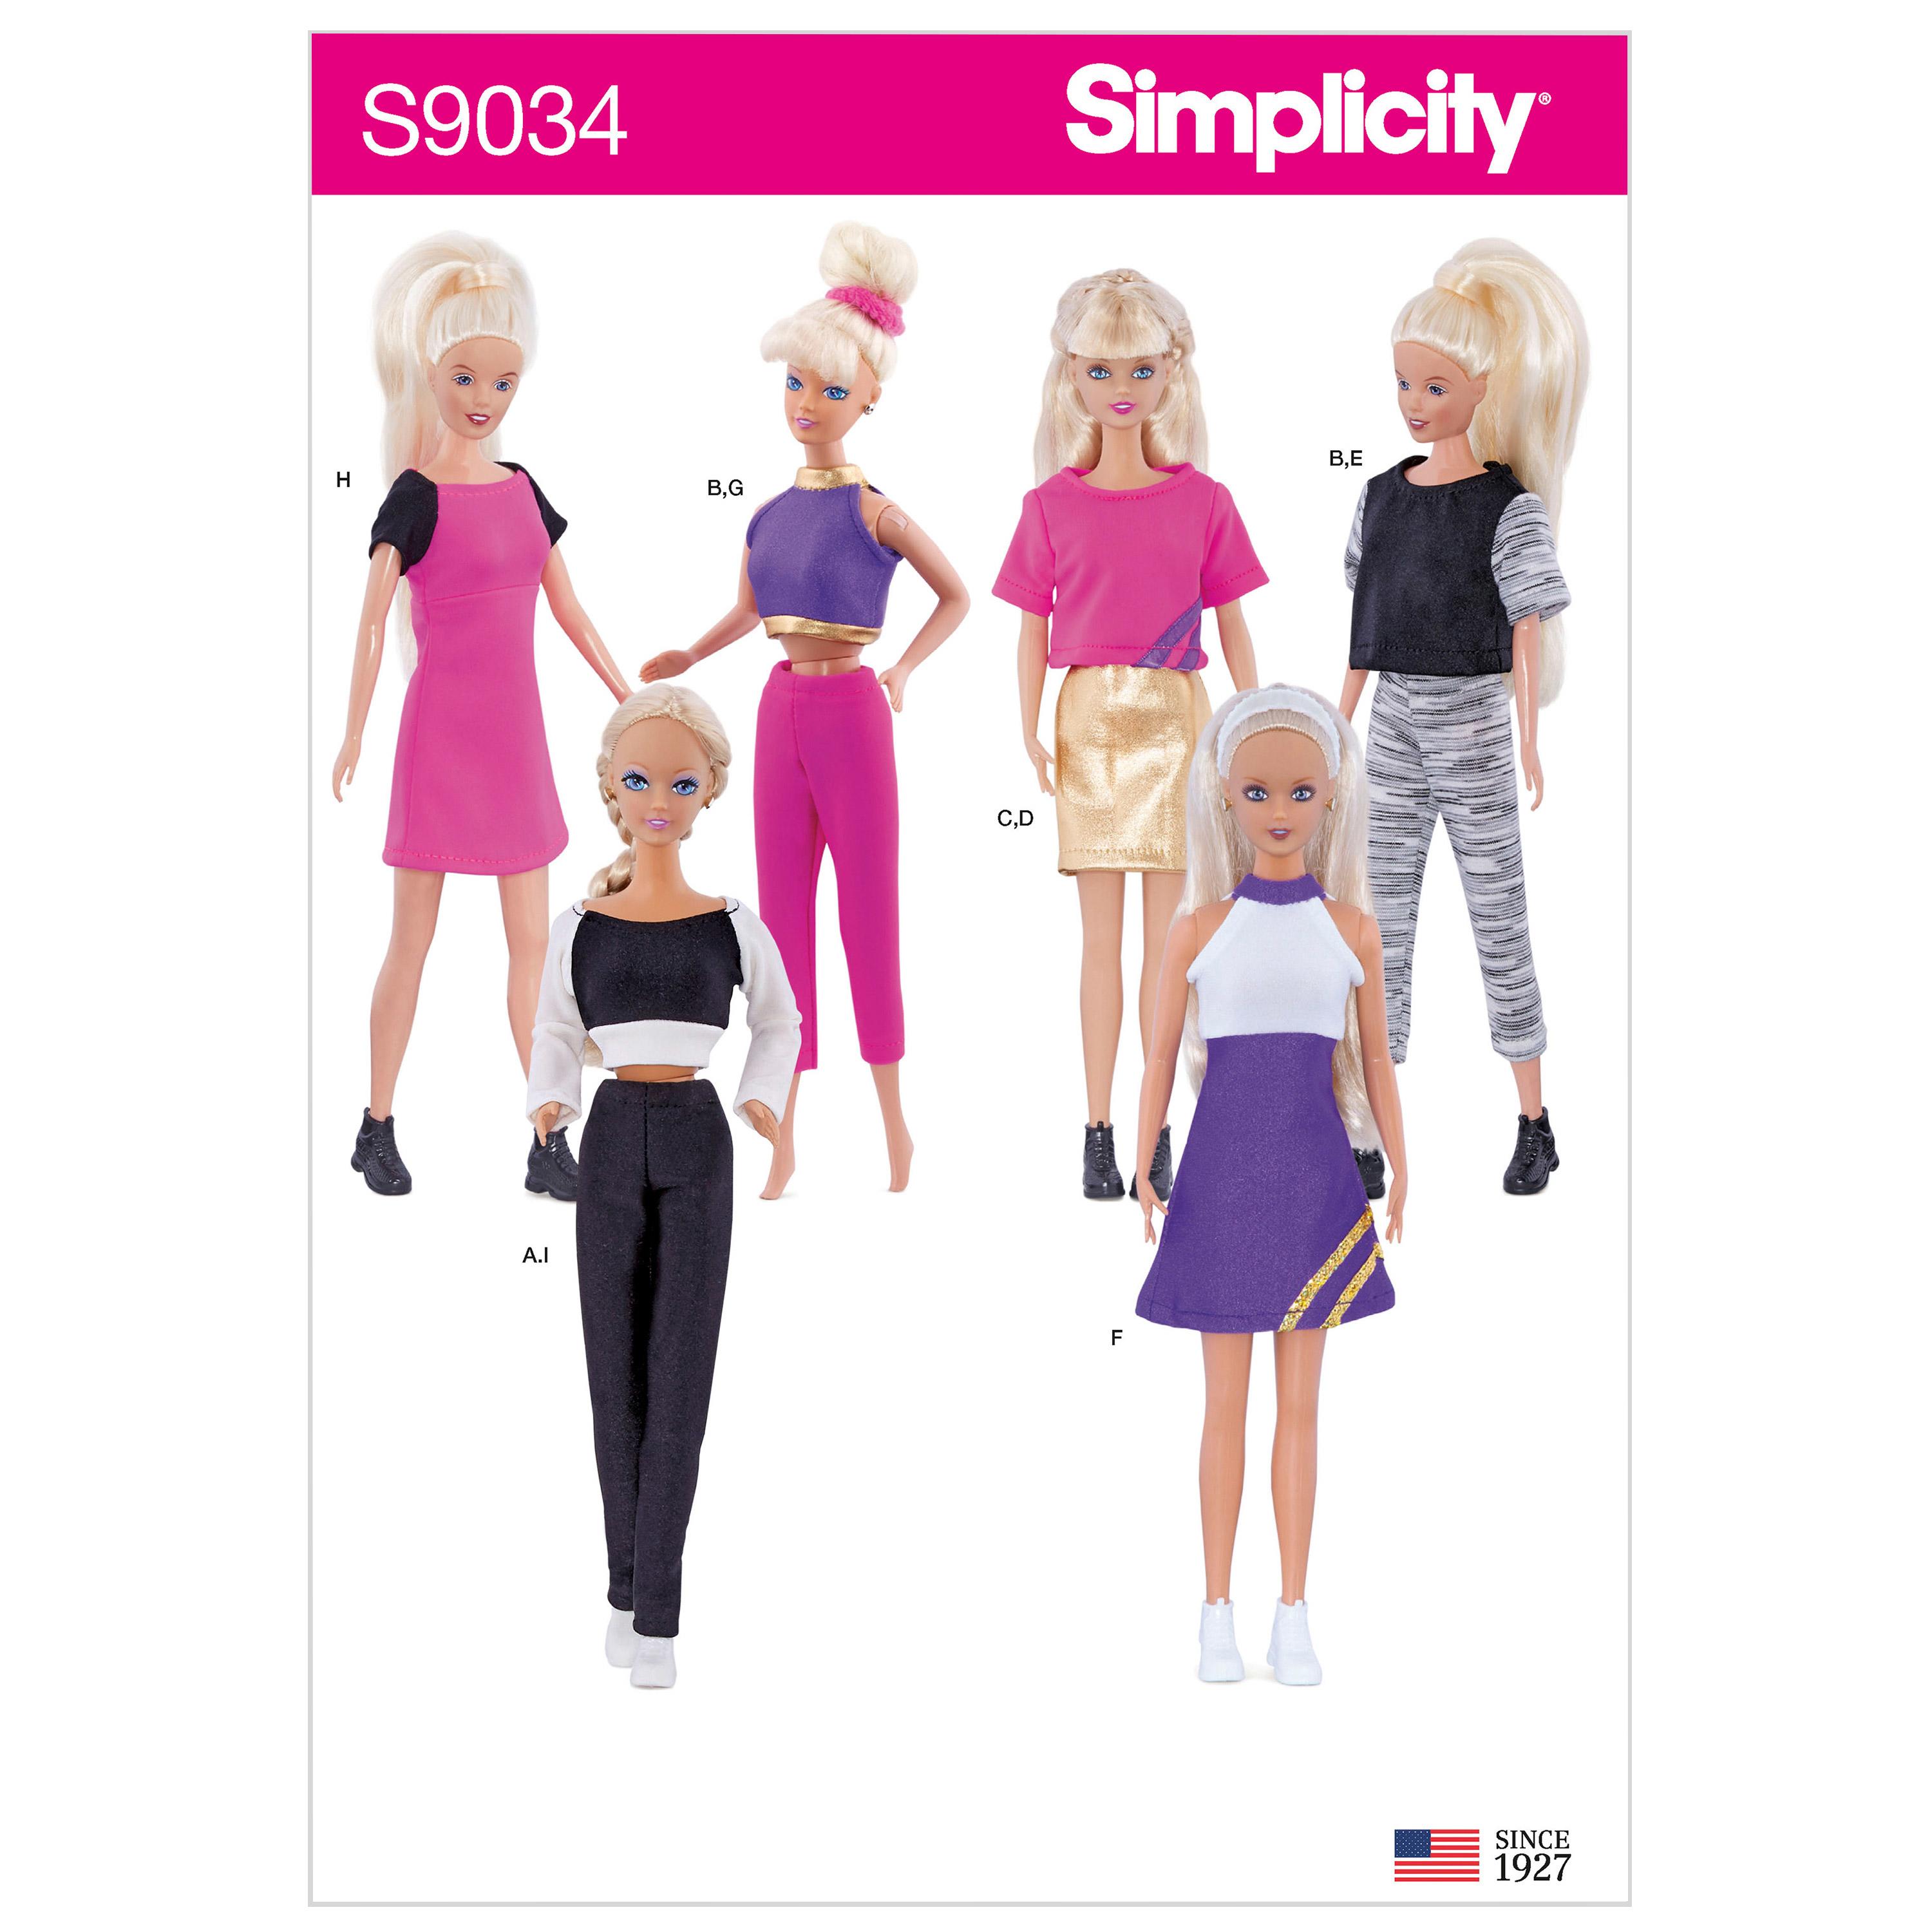 Simplicity S9034 11 1/2" Doll Clothes